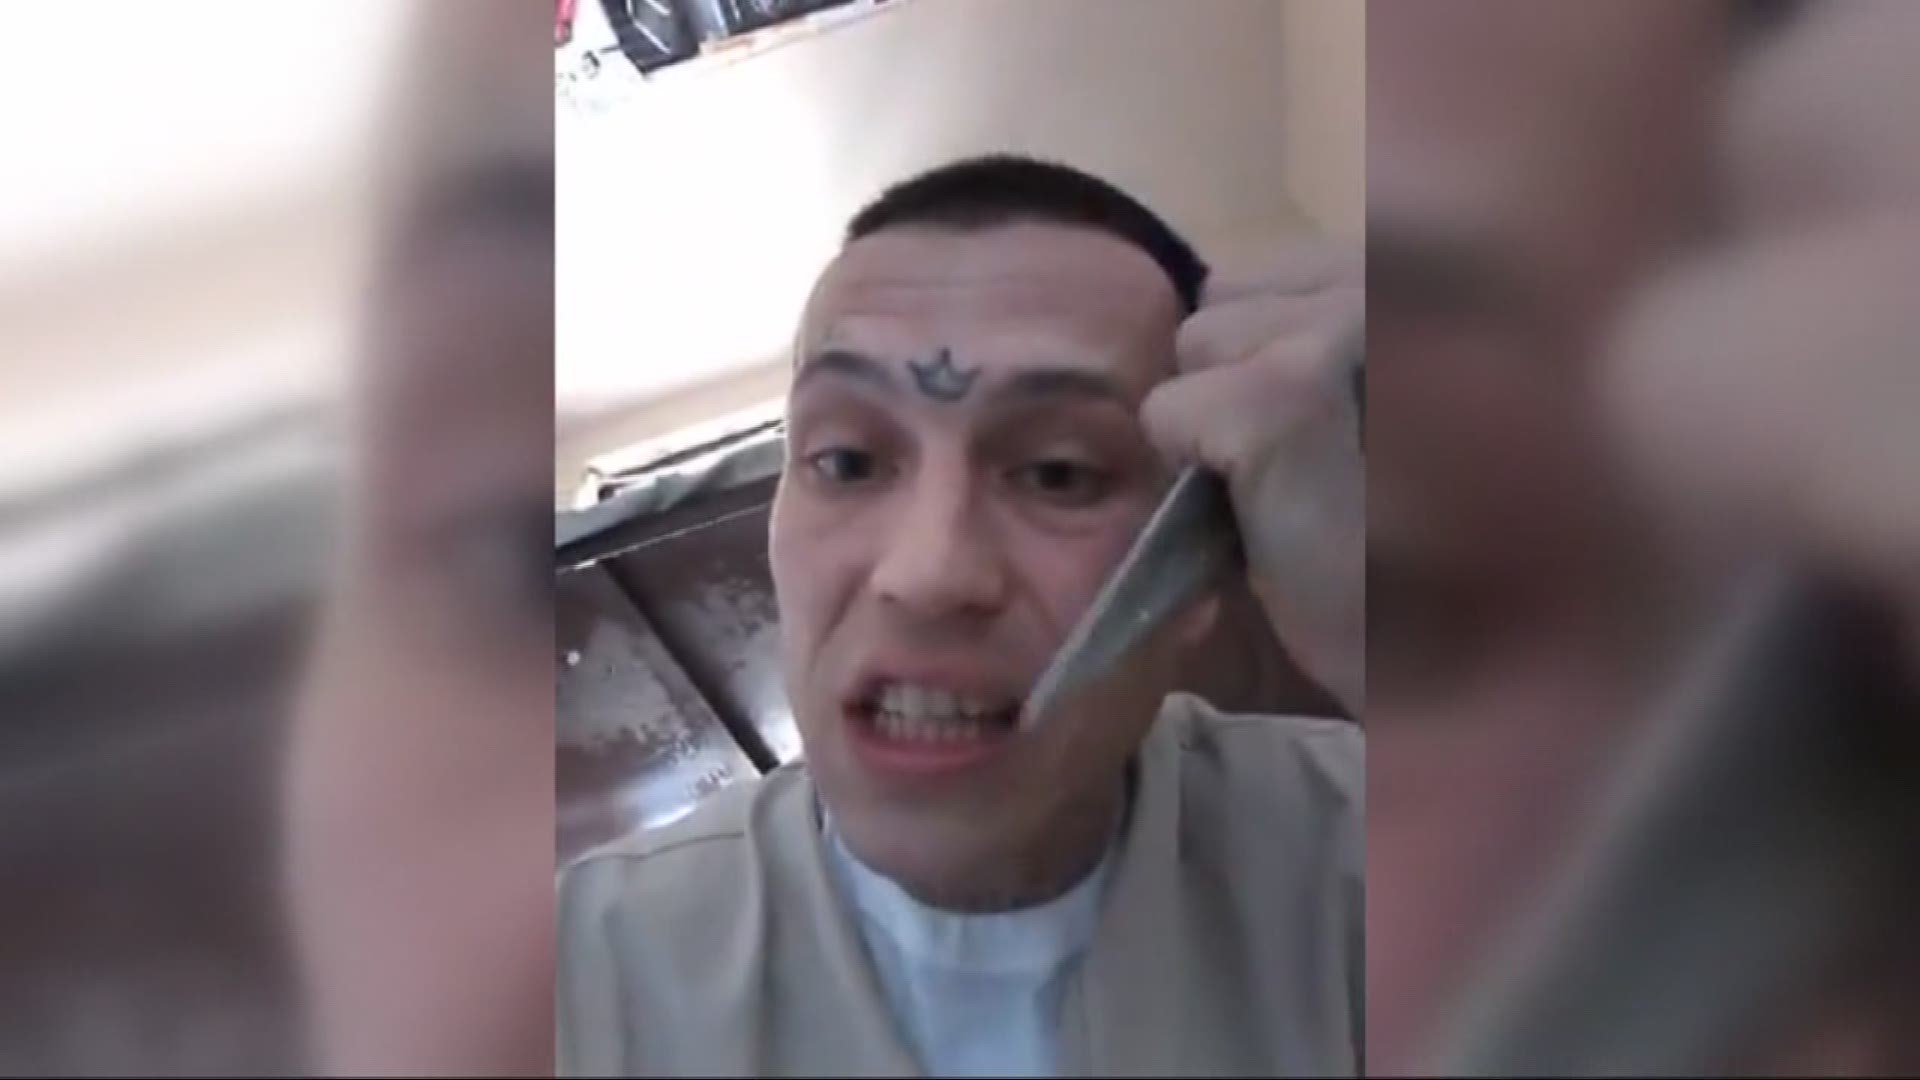 New videos have surfaced showing a South Carolina inmate in a South Carolina prison holding a knife and making boasts and threats on Facebook Live.